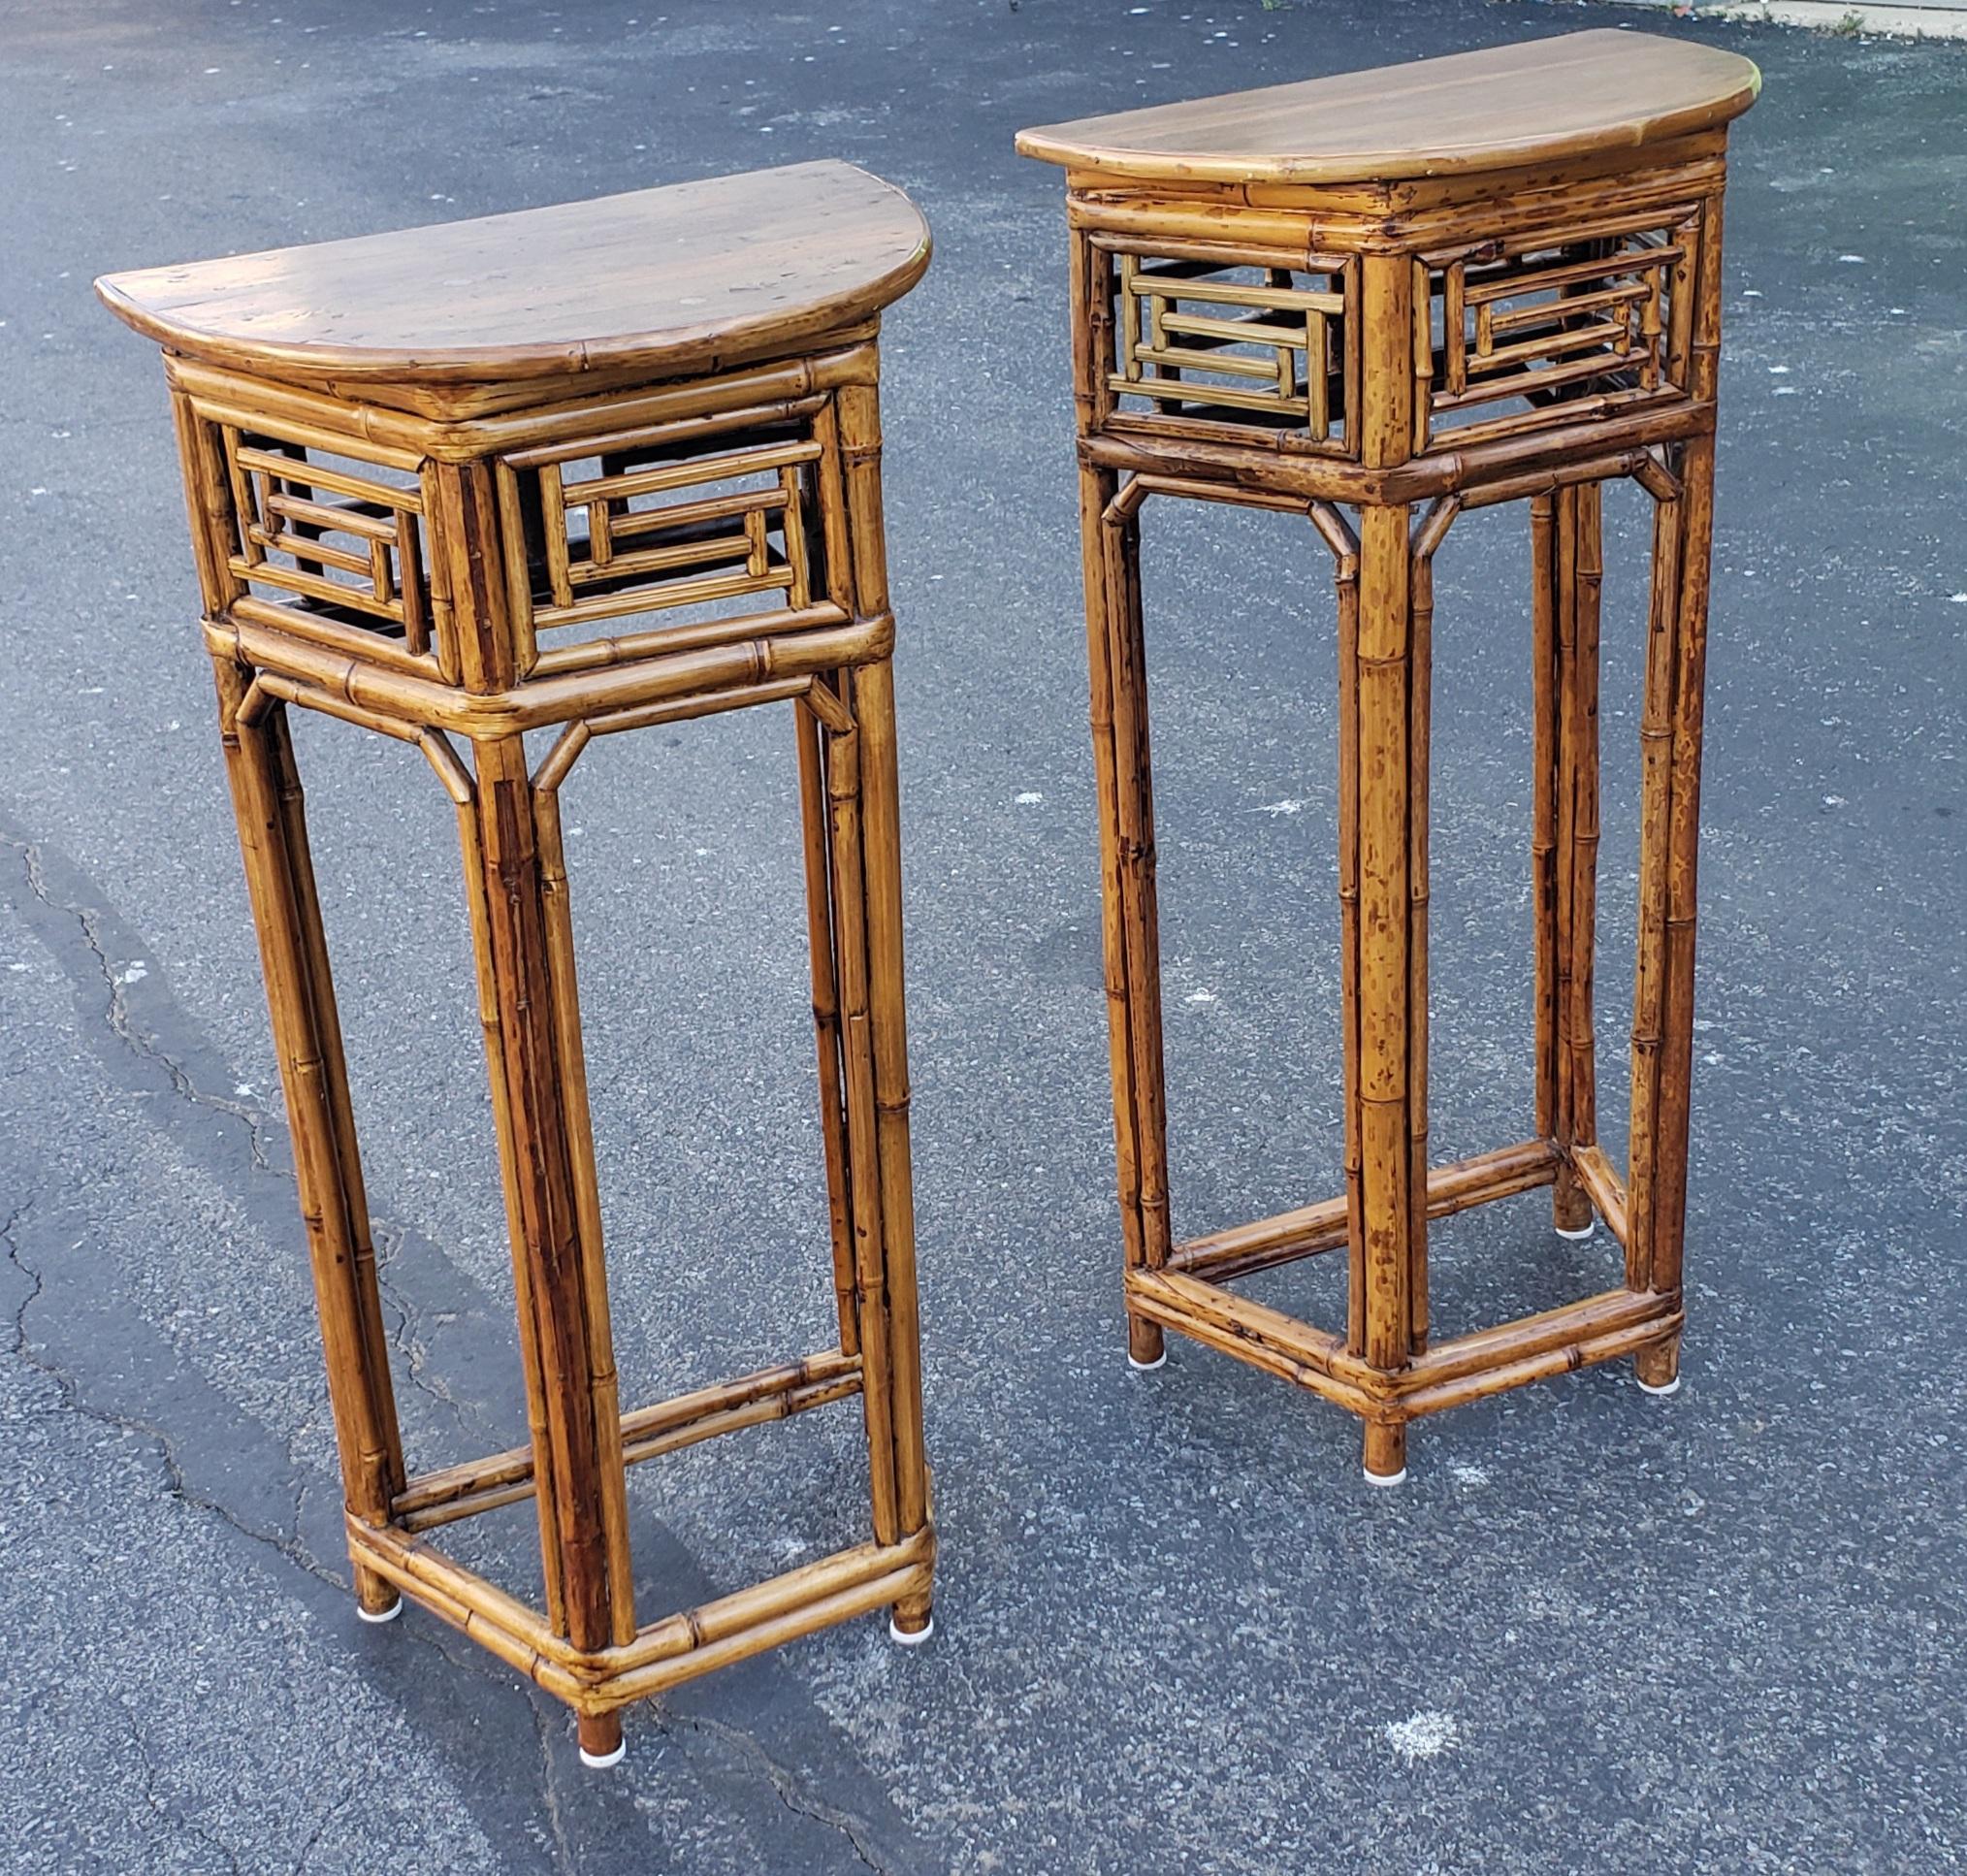 Pair Chinese Bamboo Demilune side tables or plant stand measuring 16.5